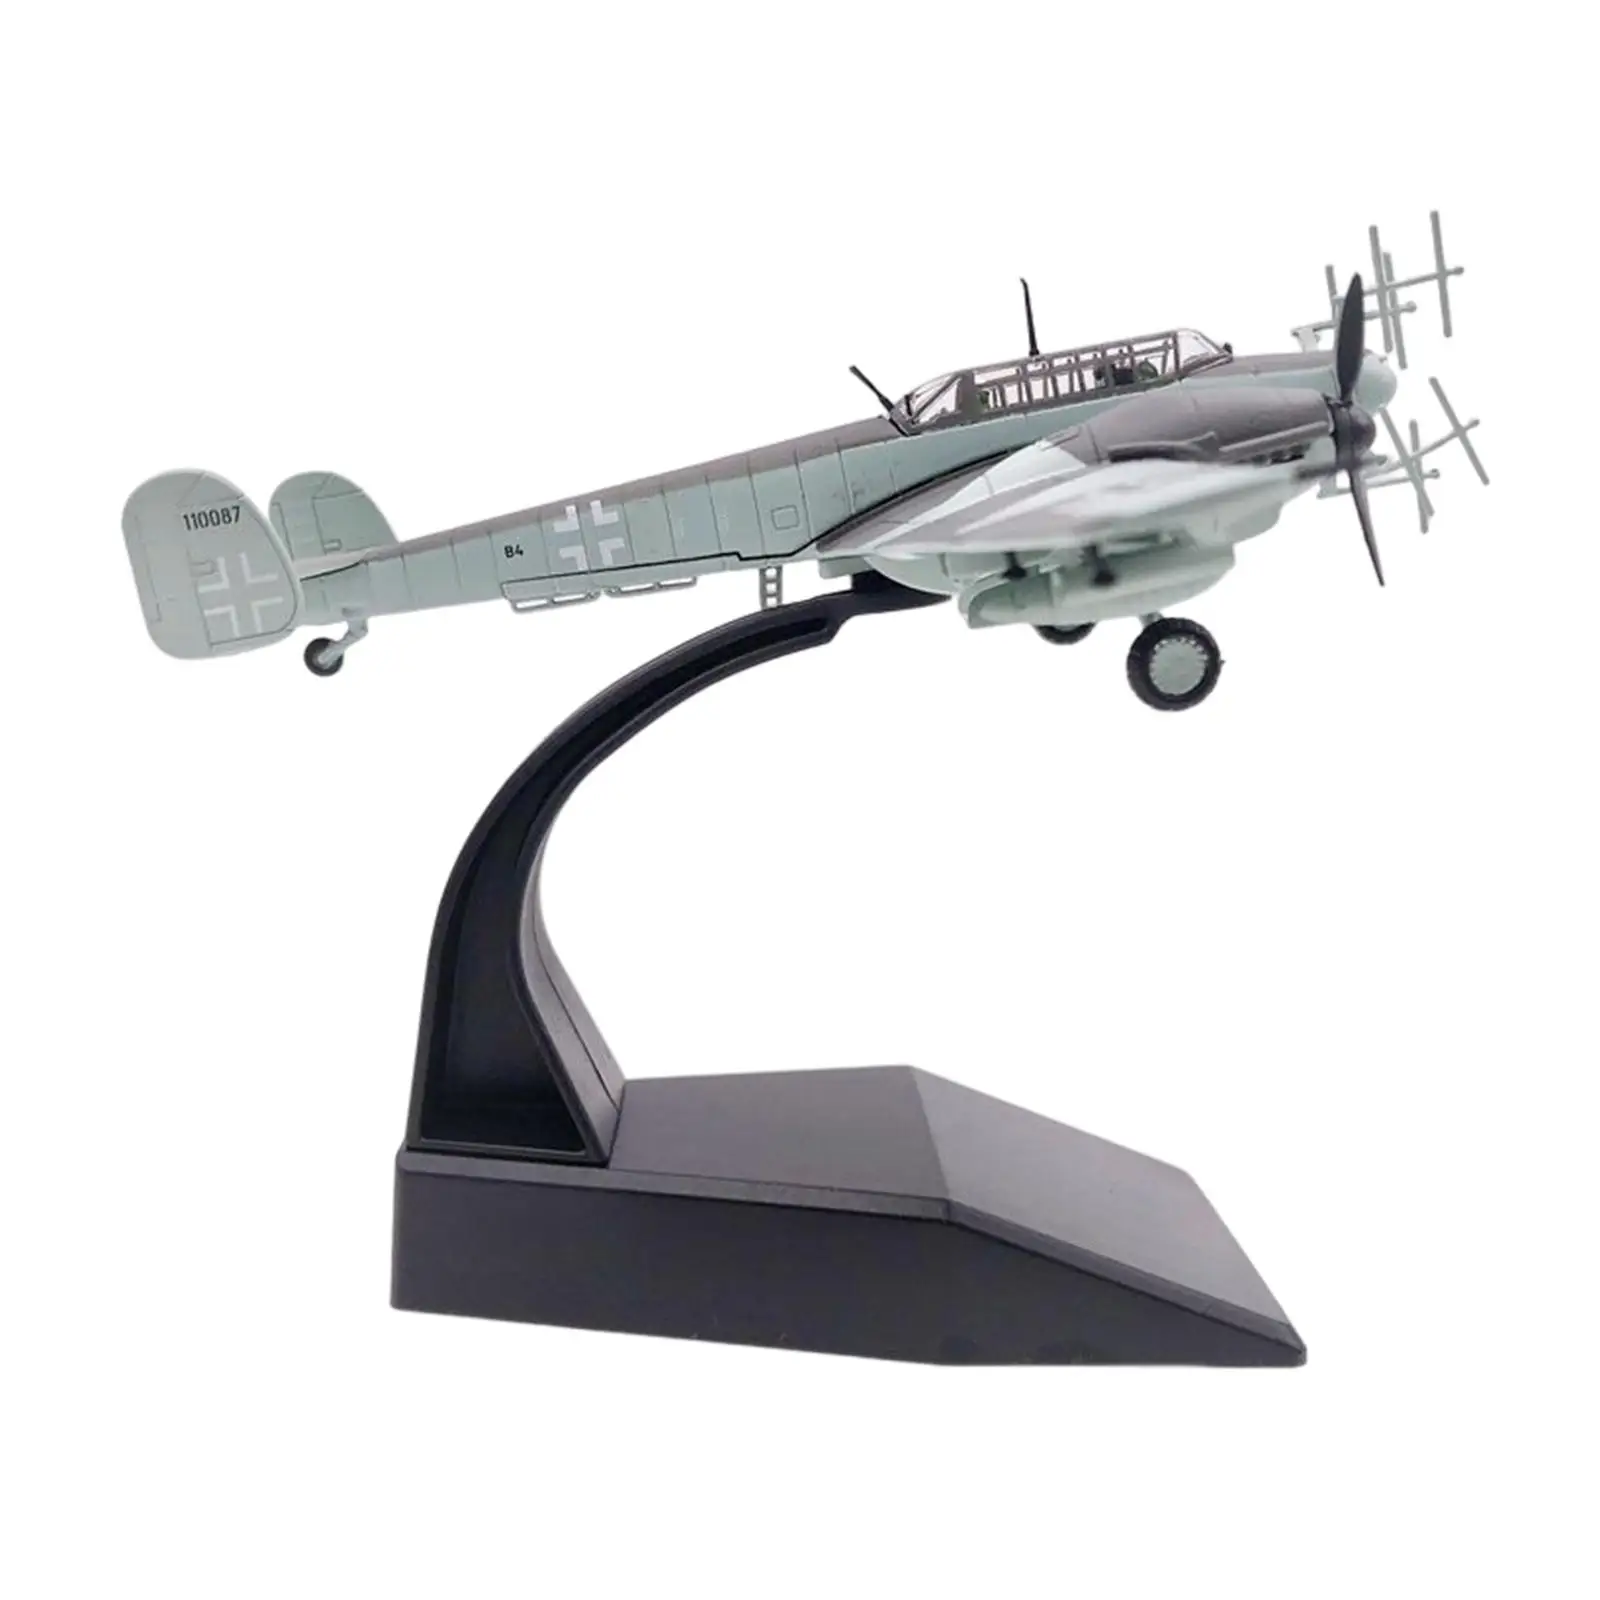 1/100 Scale BF-110 Fighter Model Fighter  Aircraft Toy with Stand Display Model Home Accessory for Boy Birthday Gifts